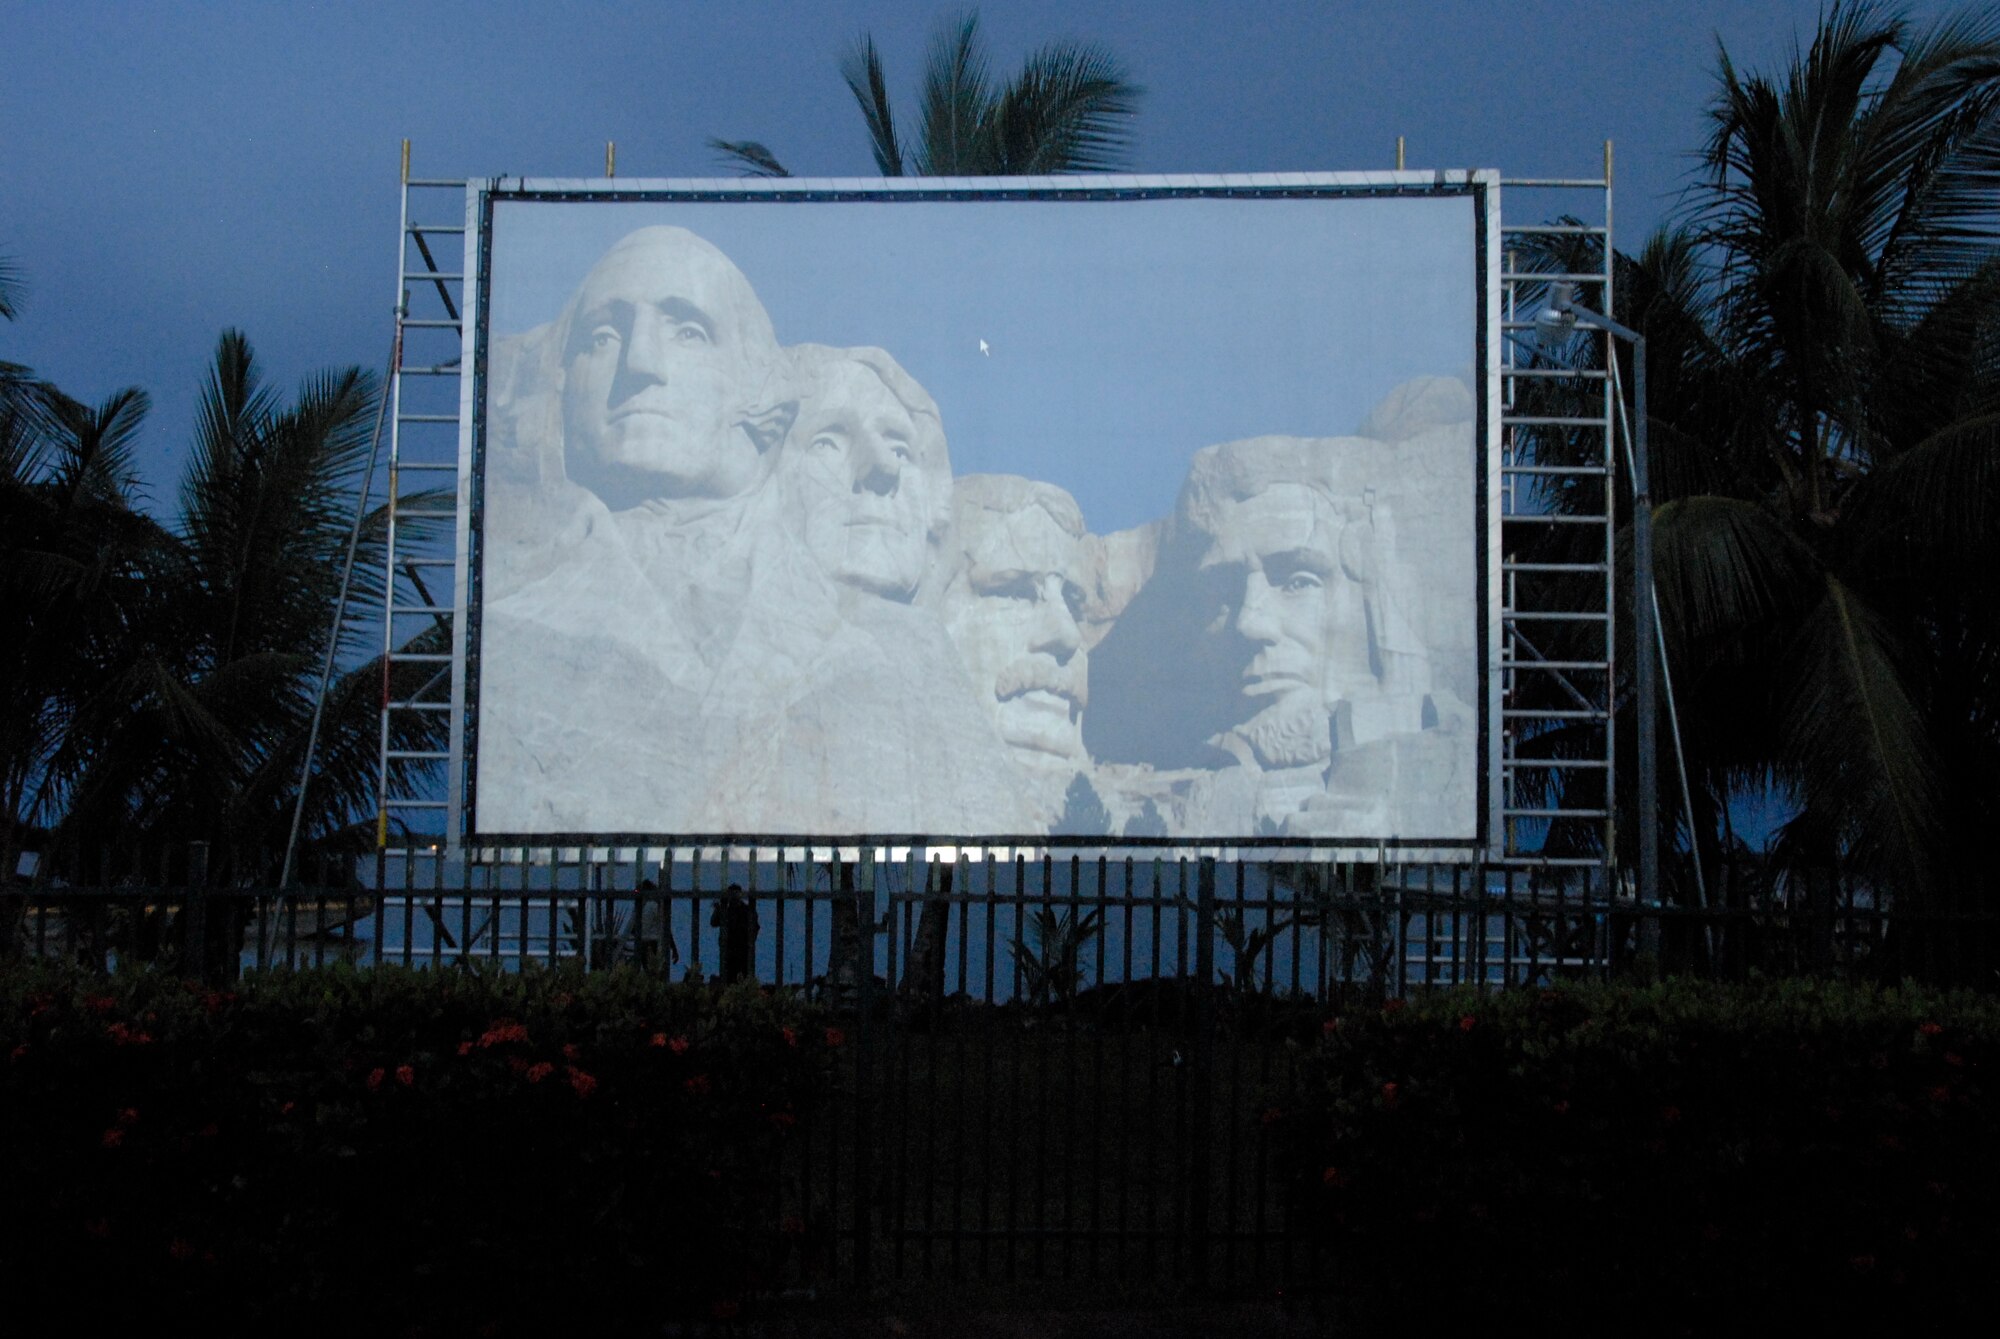 A screen projects the faces of Mt. Rushmore as firewords are displayed in the background during the 4th of July celebration at the U.S. Embassy in Suriname.
(U.S. Air Force Photo by Master Sgt Chris Stewart)